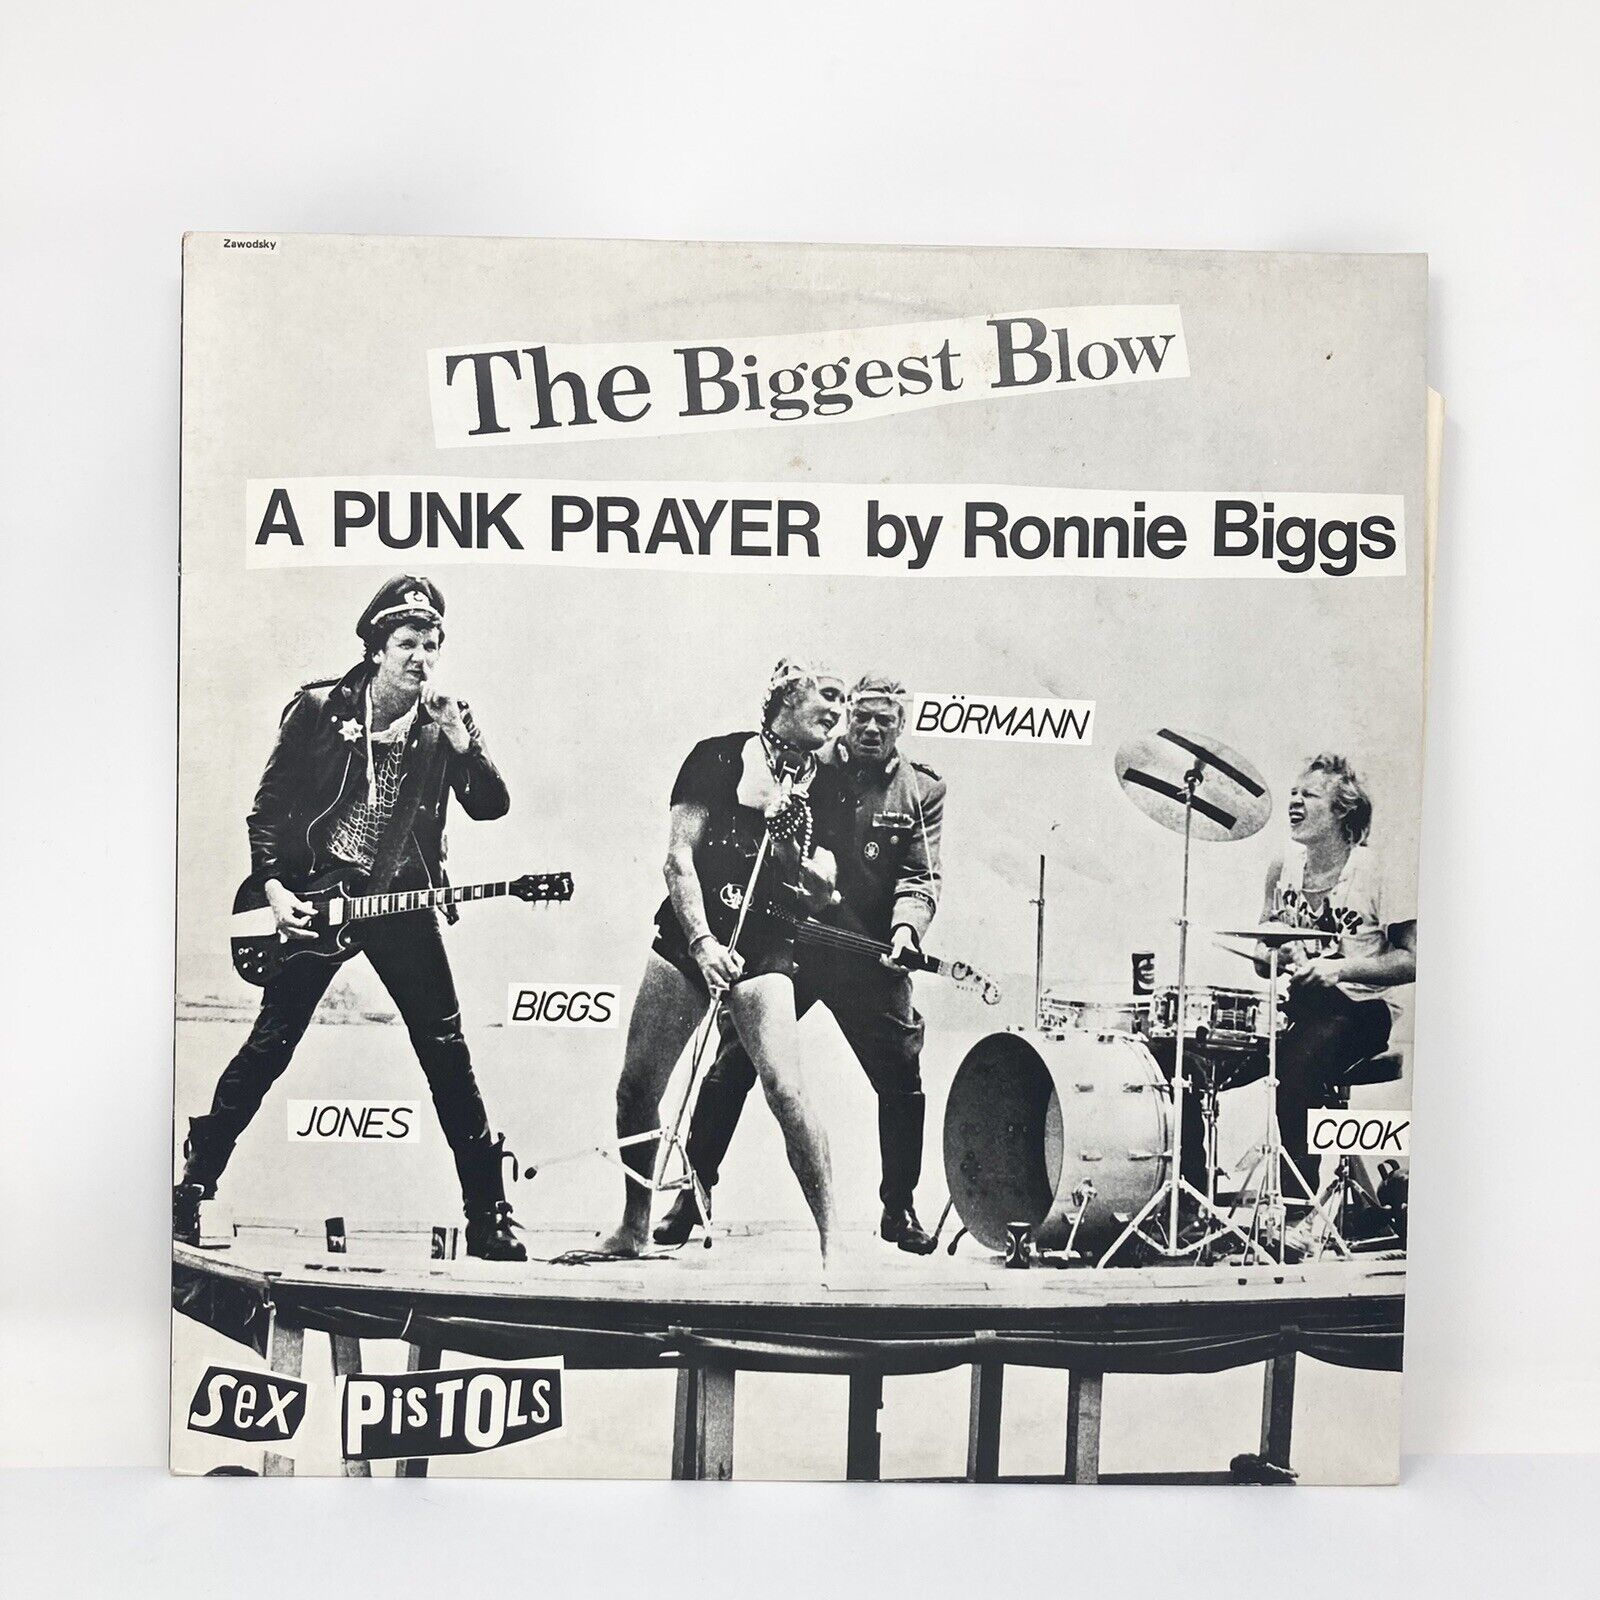 Sex Pistols – The Biggest Blow (A Punk Prayer By Ronald Biggs) 12\